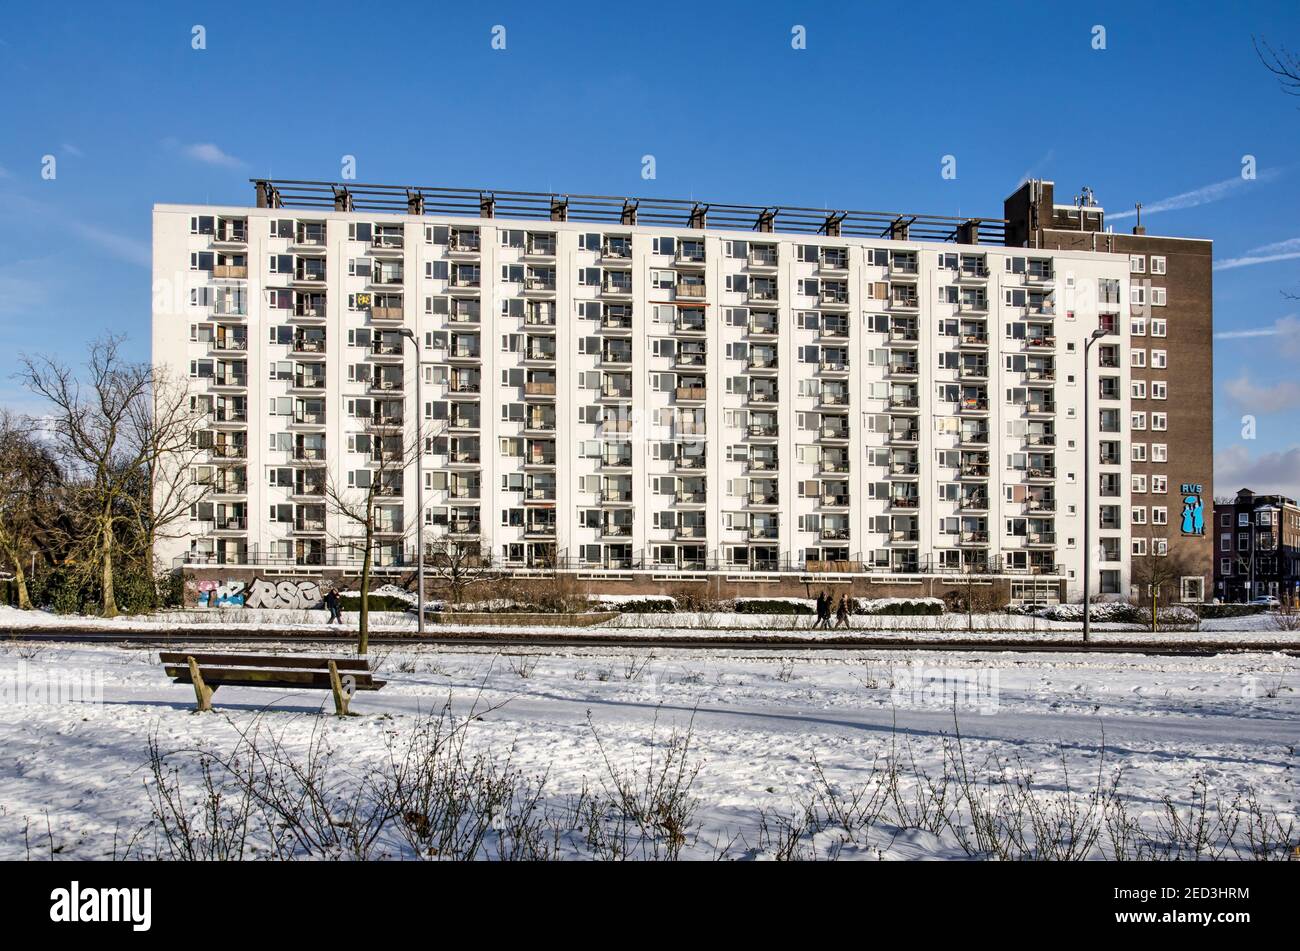 Rotterdam, The Netherlands, February 10, 2021: 10 storey modernist apartment building designed in the 1950's for the housing of single working women Stock Photo